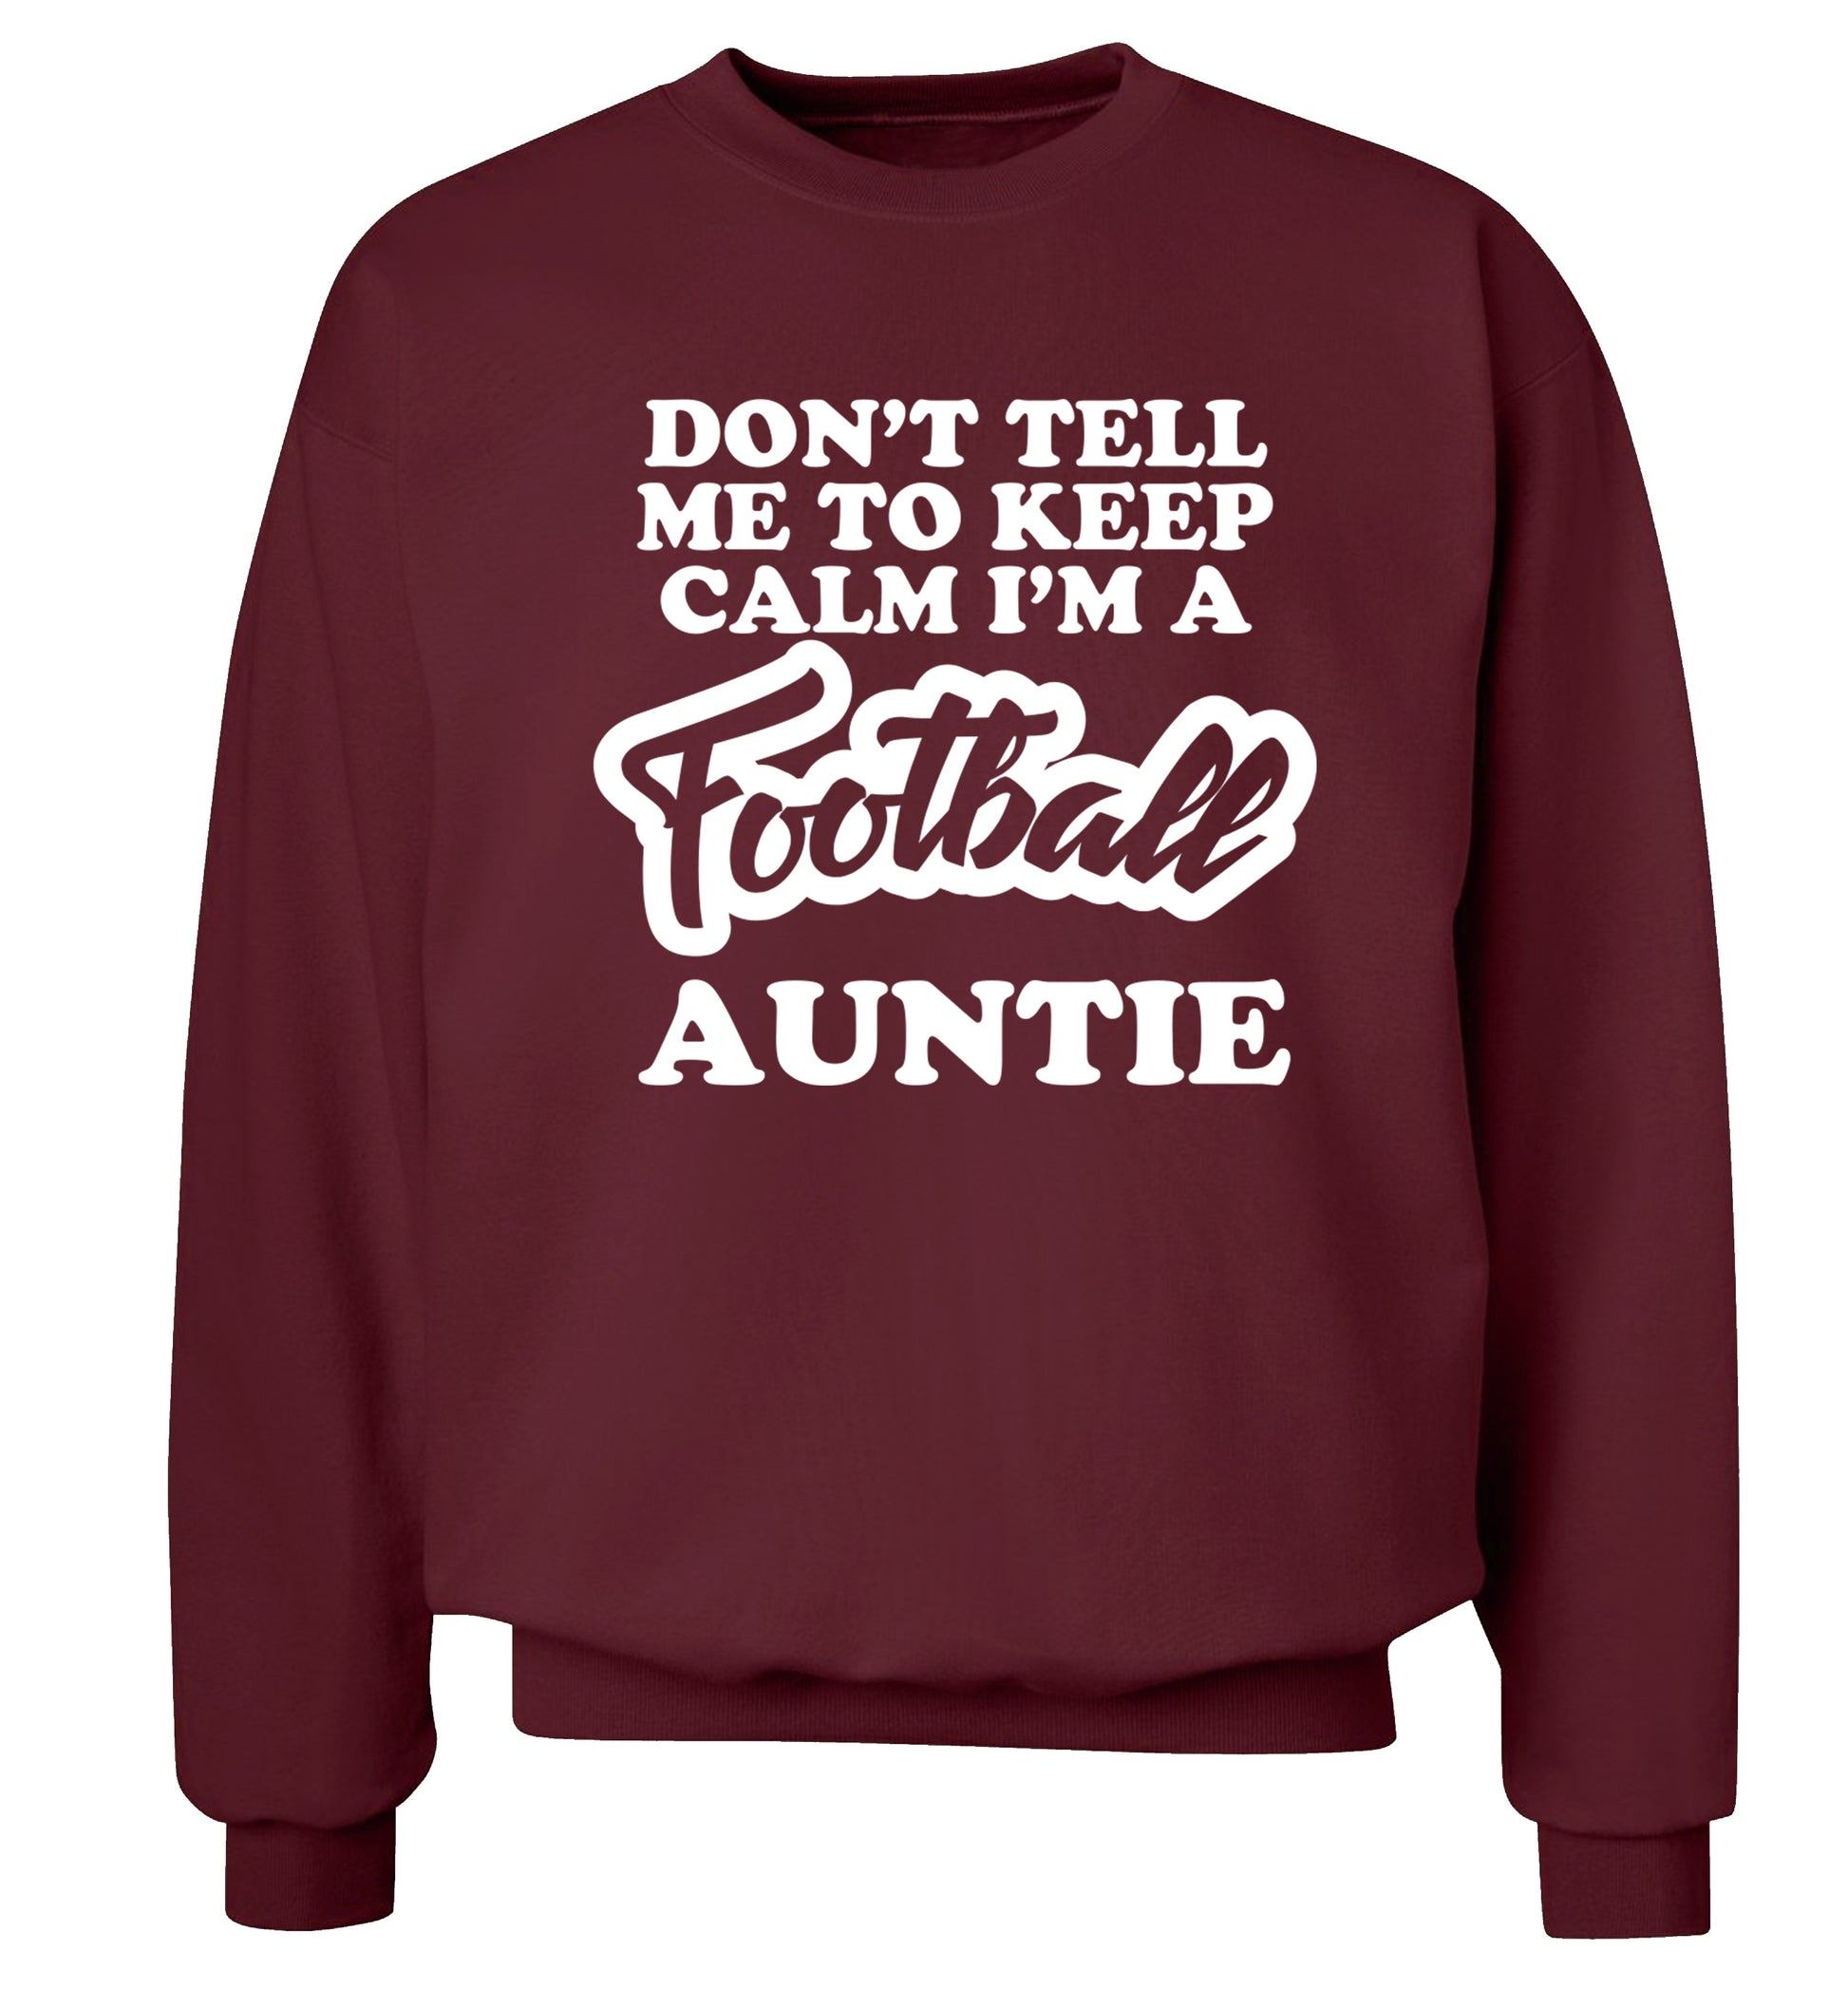 Don't tell me to keep calm I'm a football auntie Adult's unisexmaroon Sweater 2XL